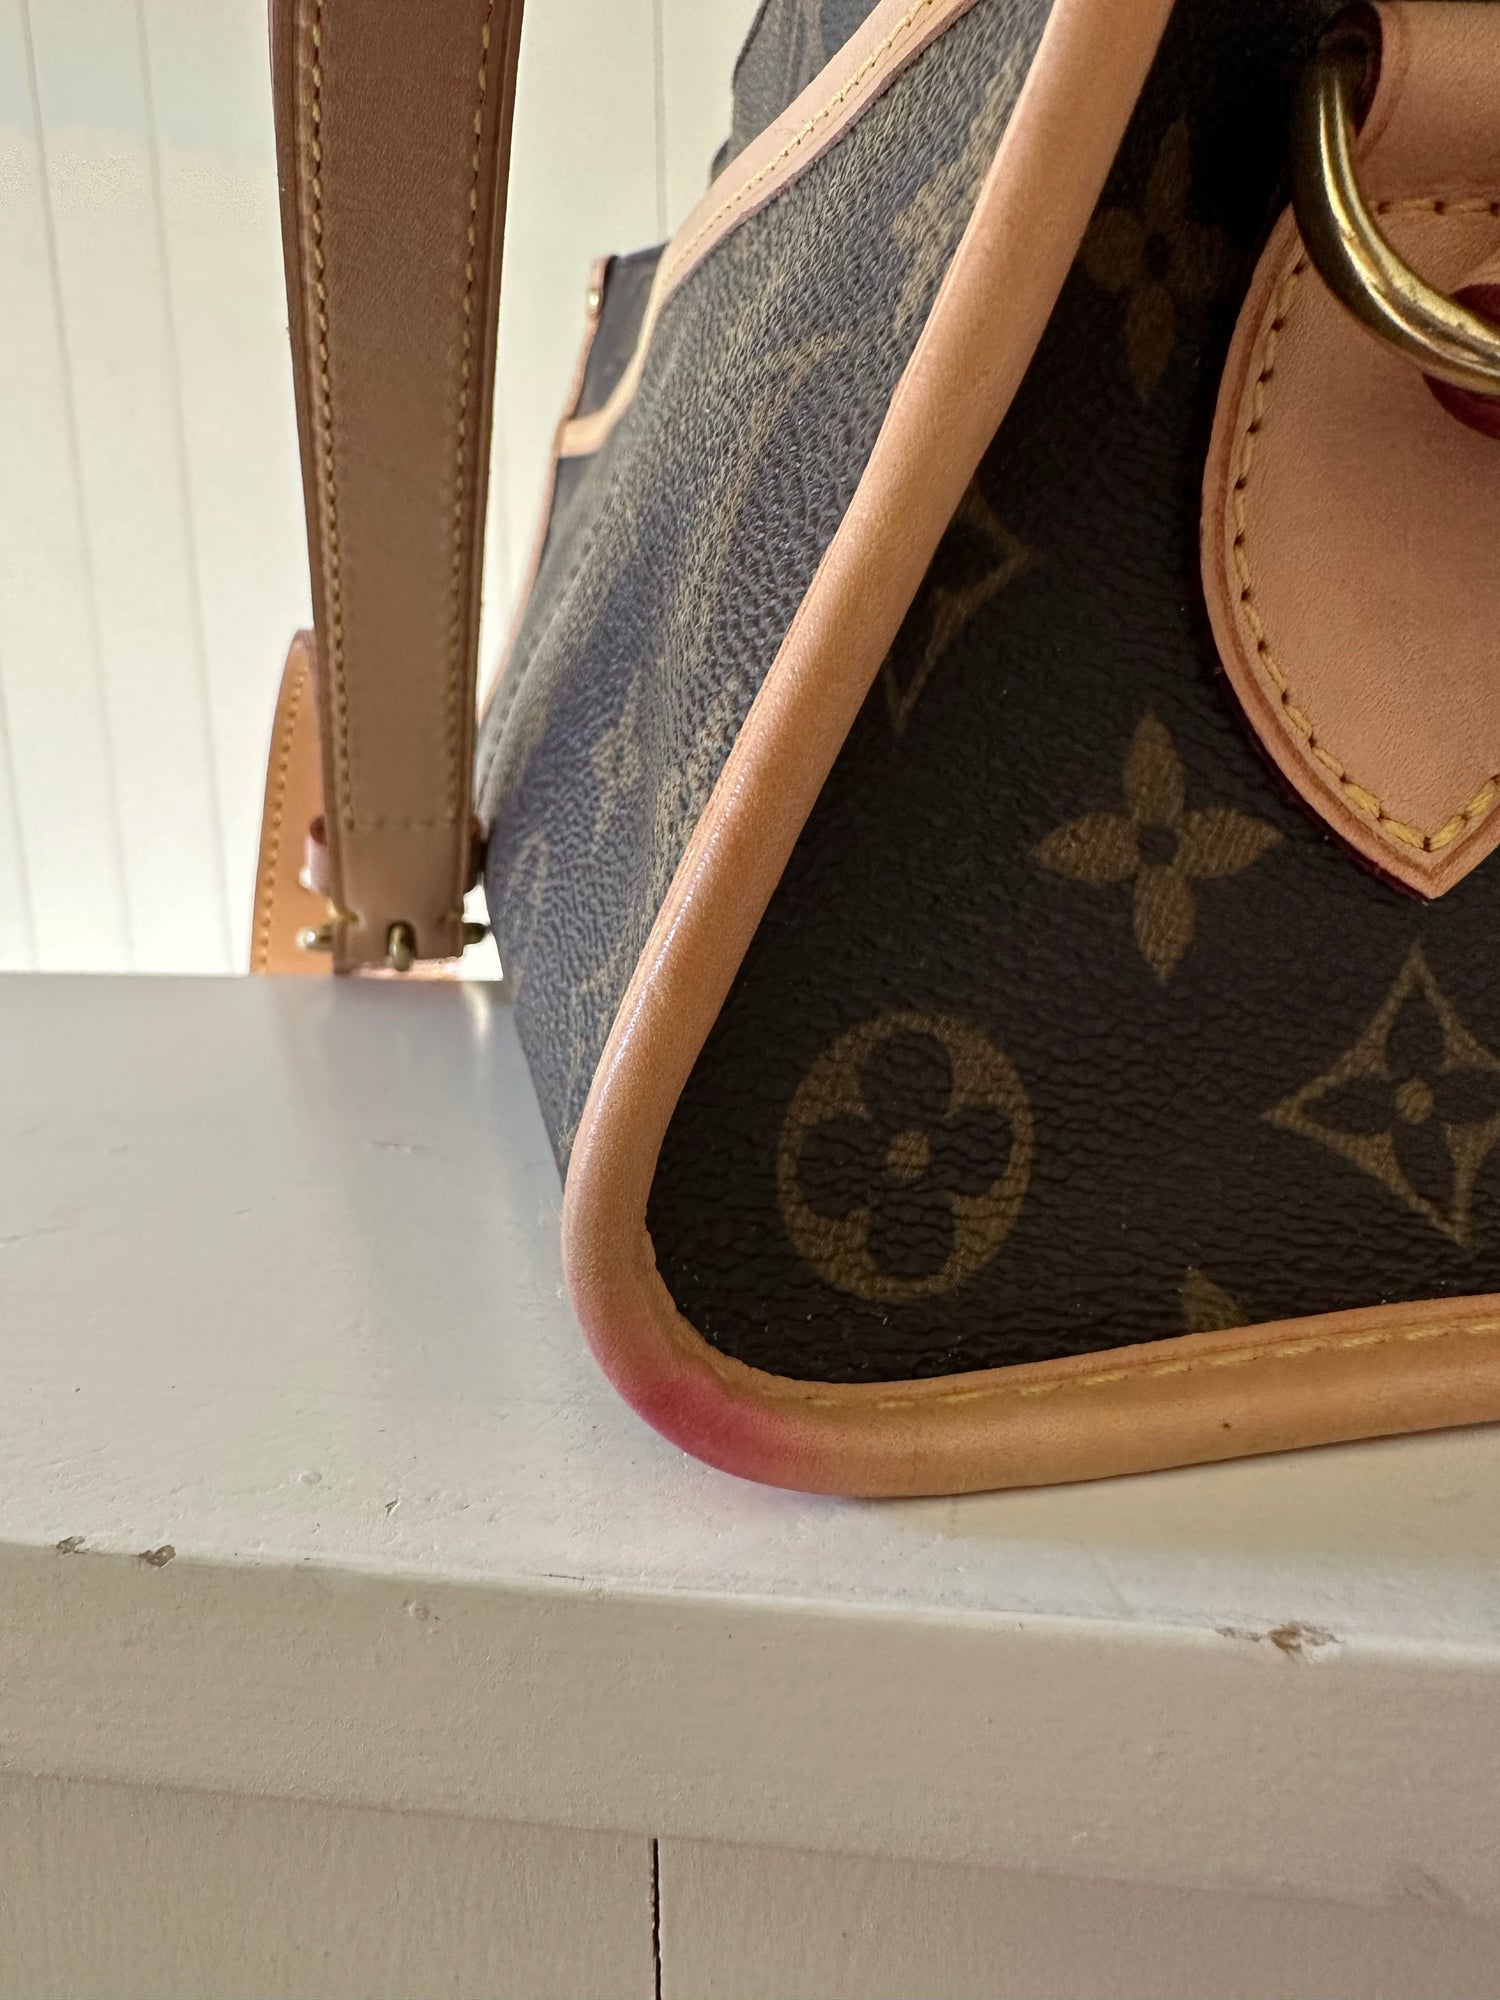 Shop for Louis Vuitton Monogram Canvas Leather Popincourt Bag - Shipped  from USA